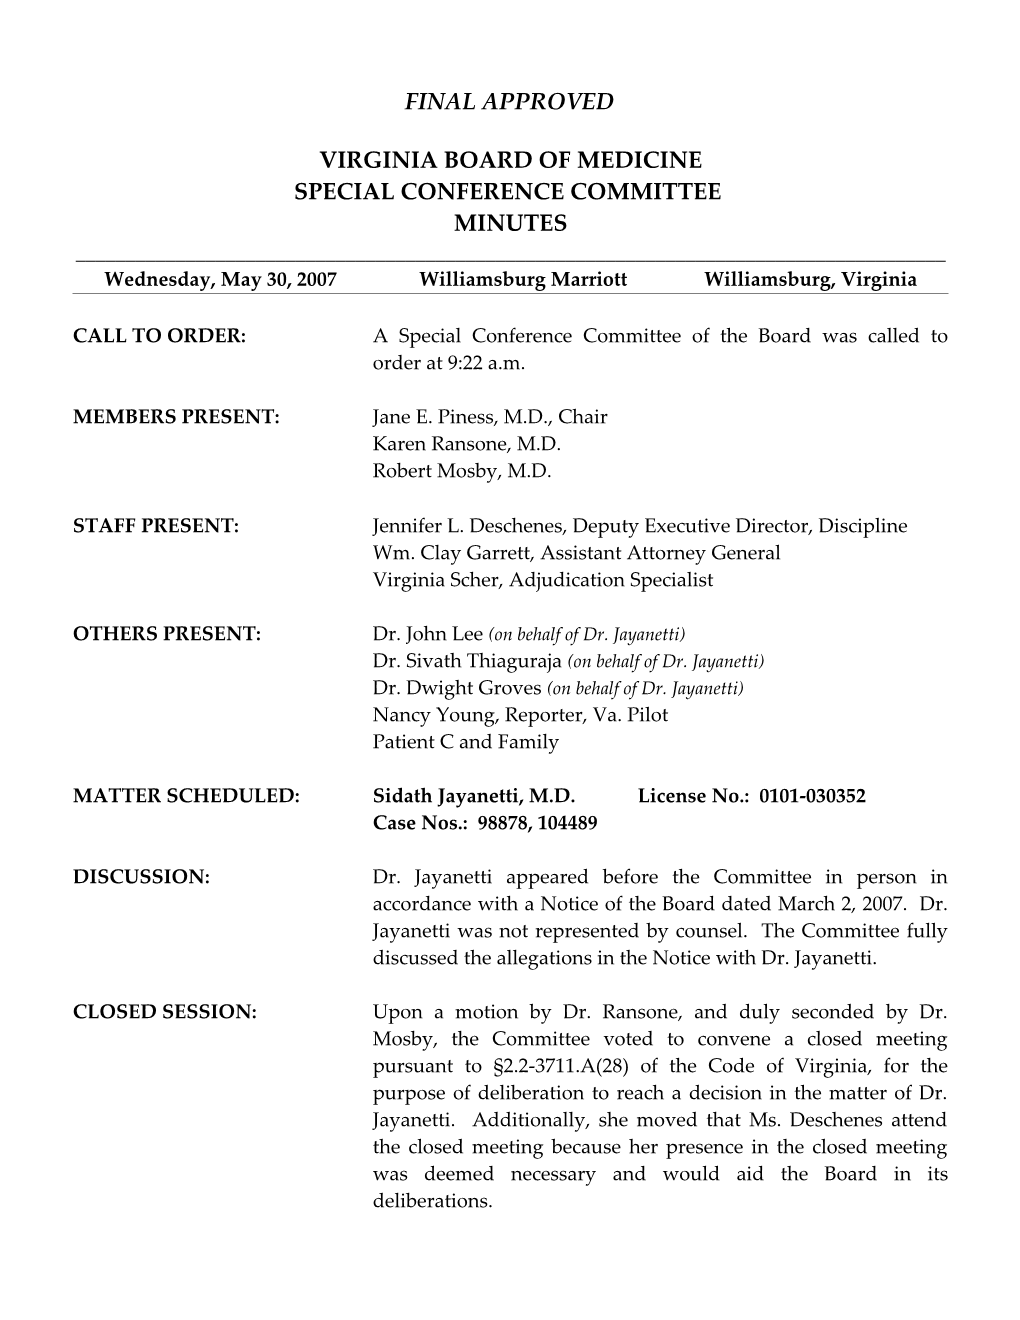 Medicine-Special Conference Committee Meeting Minutes-May 30, 2007